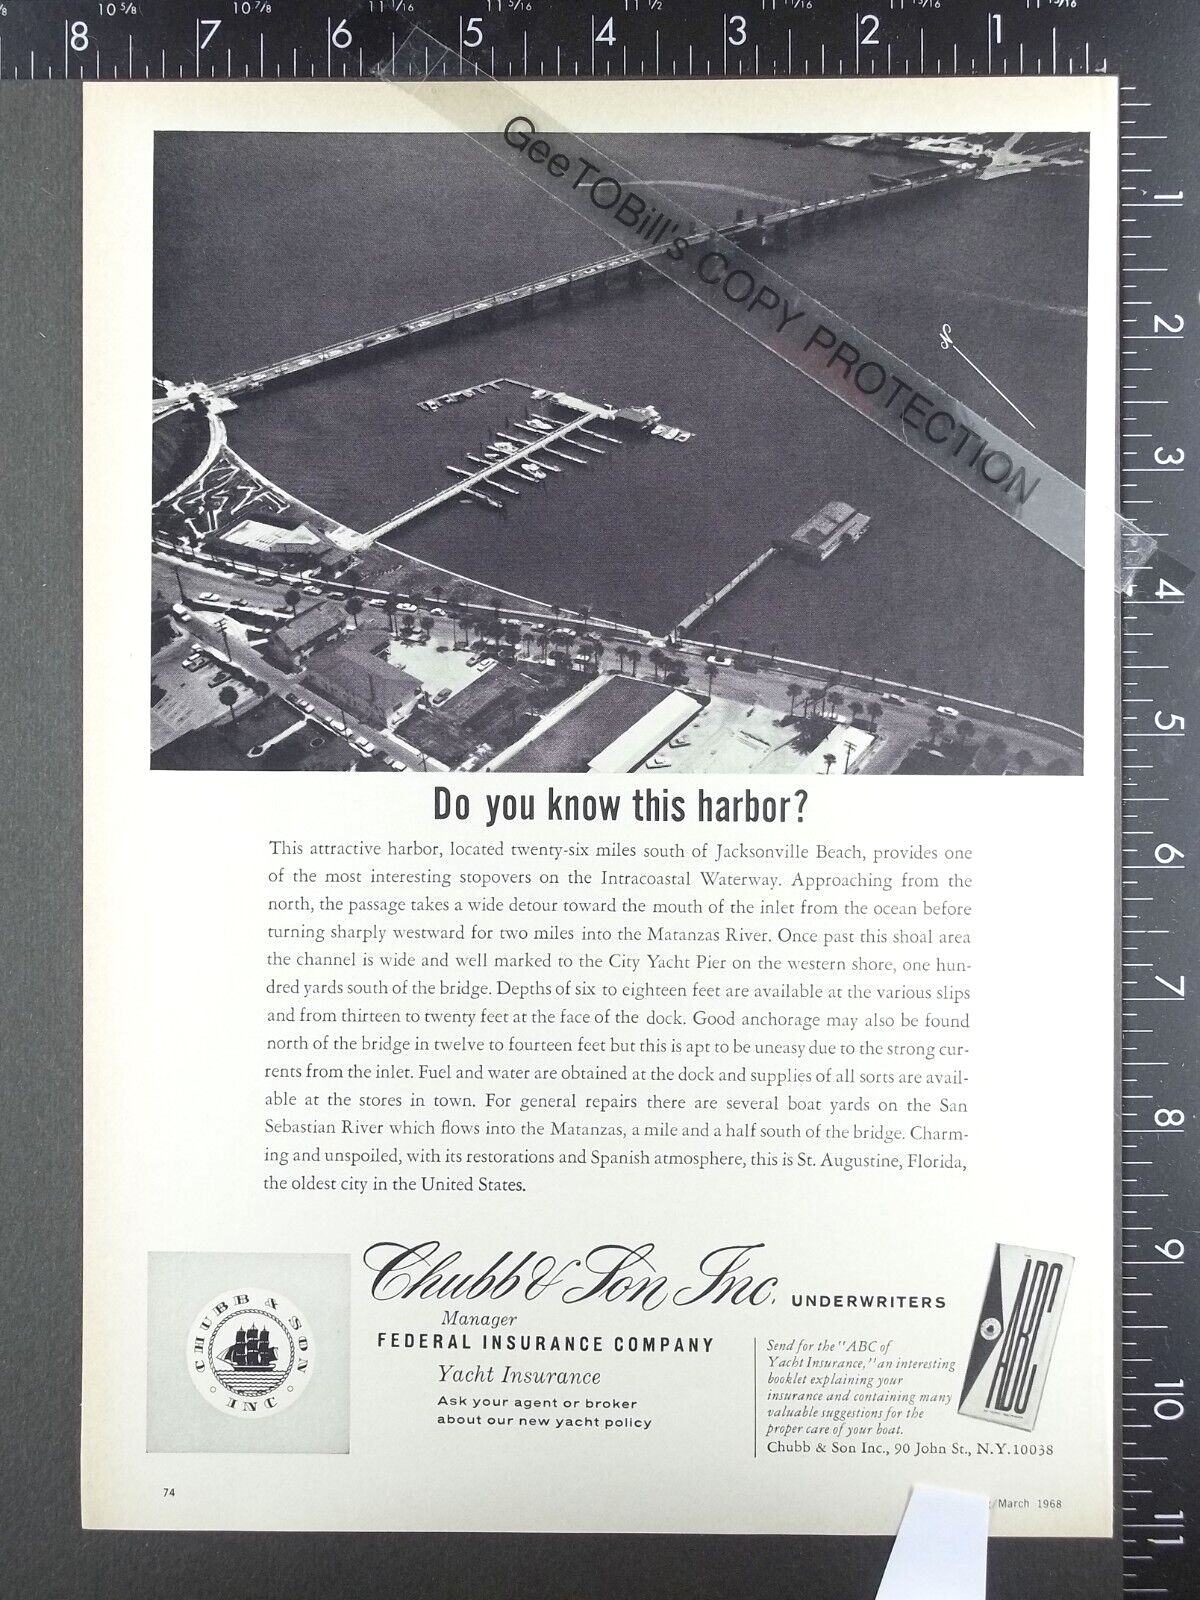 1968 ADVERTISEMENT for Chubb & Son St. Augustine FL harbor yacht boat